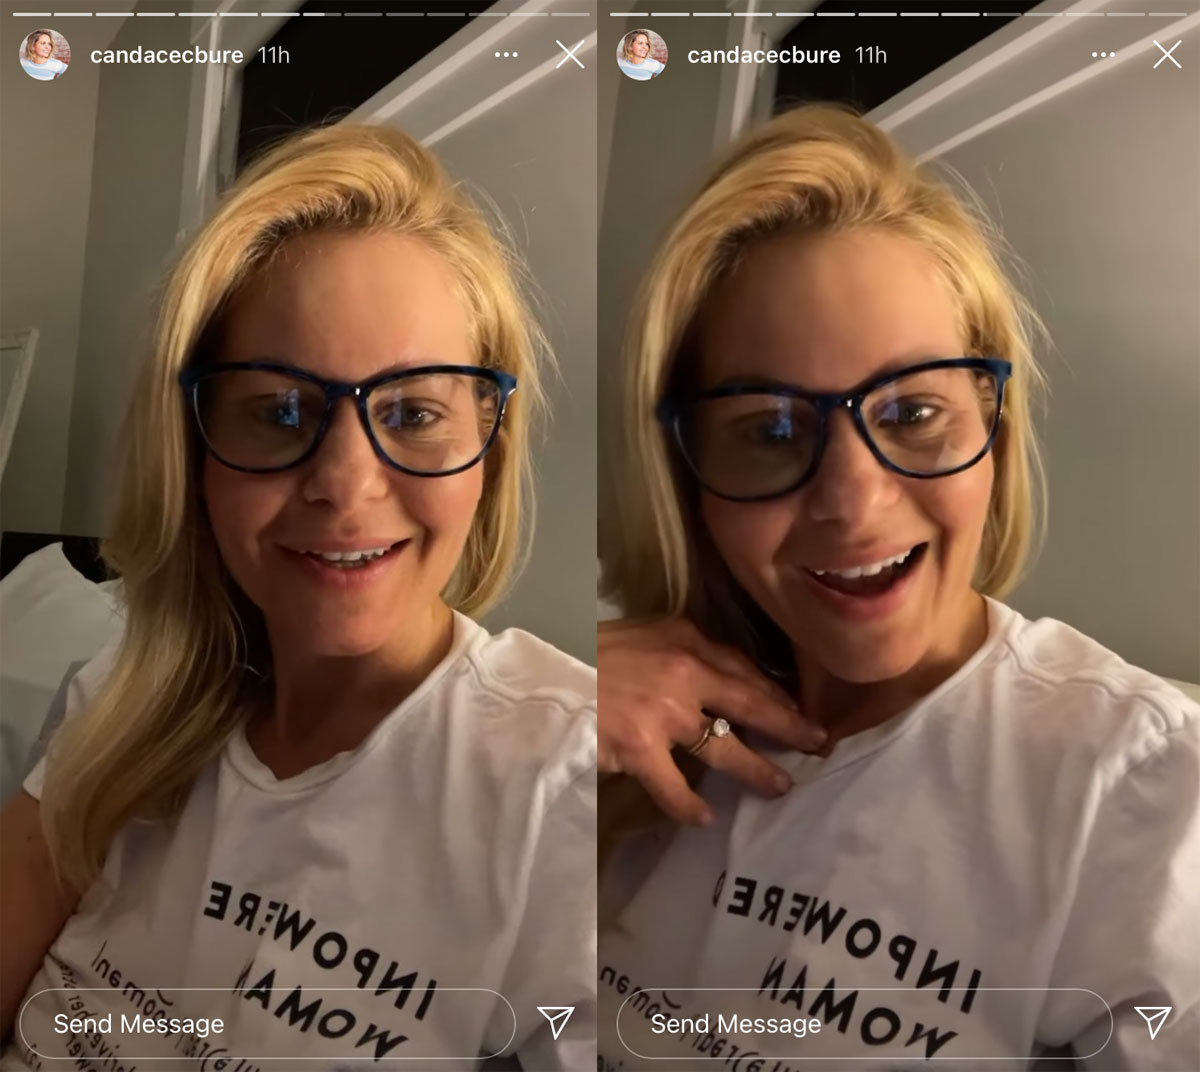 Candace Cameron Bure schools fans who are critical of her social media follows in a new Instagram Stories video!